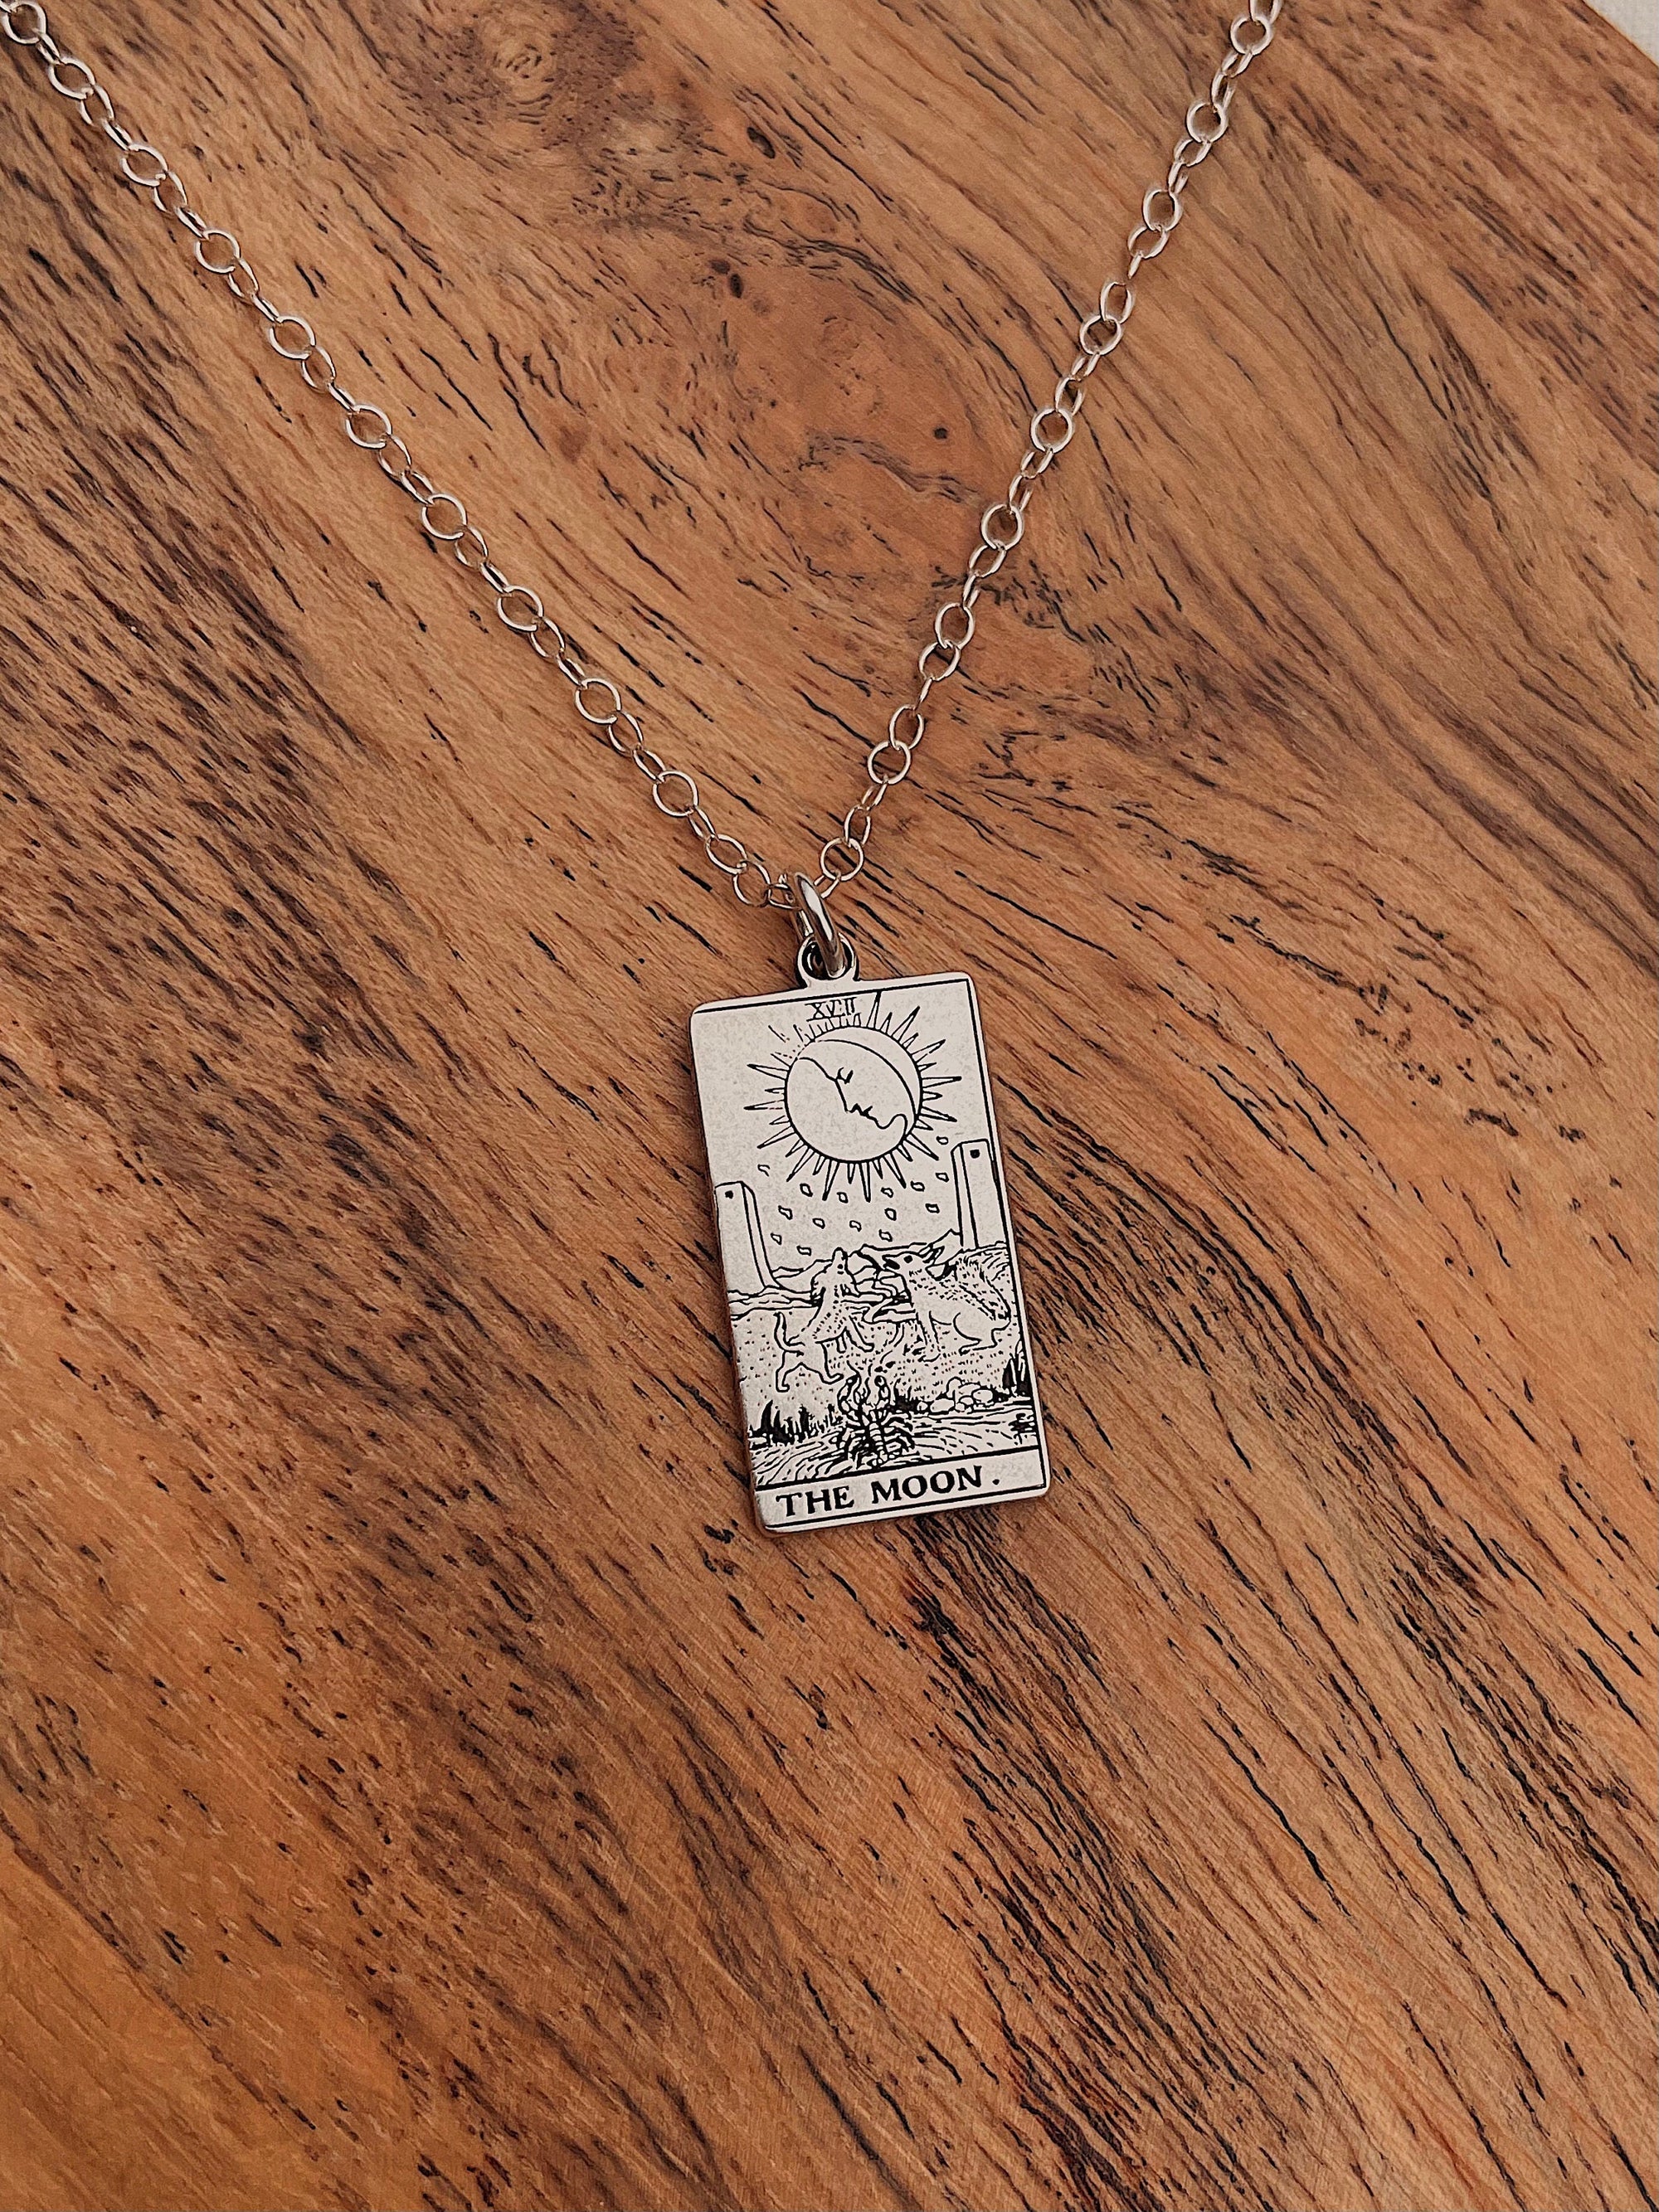 22 CARDS: Dainty Tarot Card Sterling Silver Charm Necklace | Best Friend Birthday Gift | Tarot Card Necklace | Celestial Mystic Jewelry